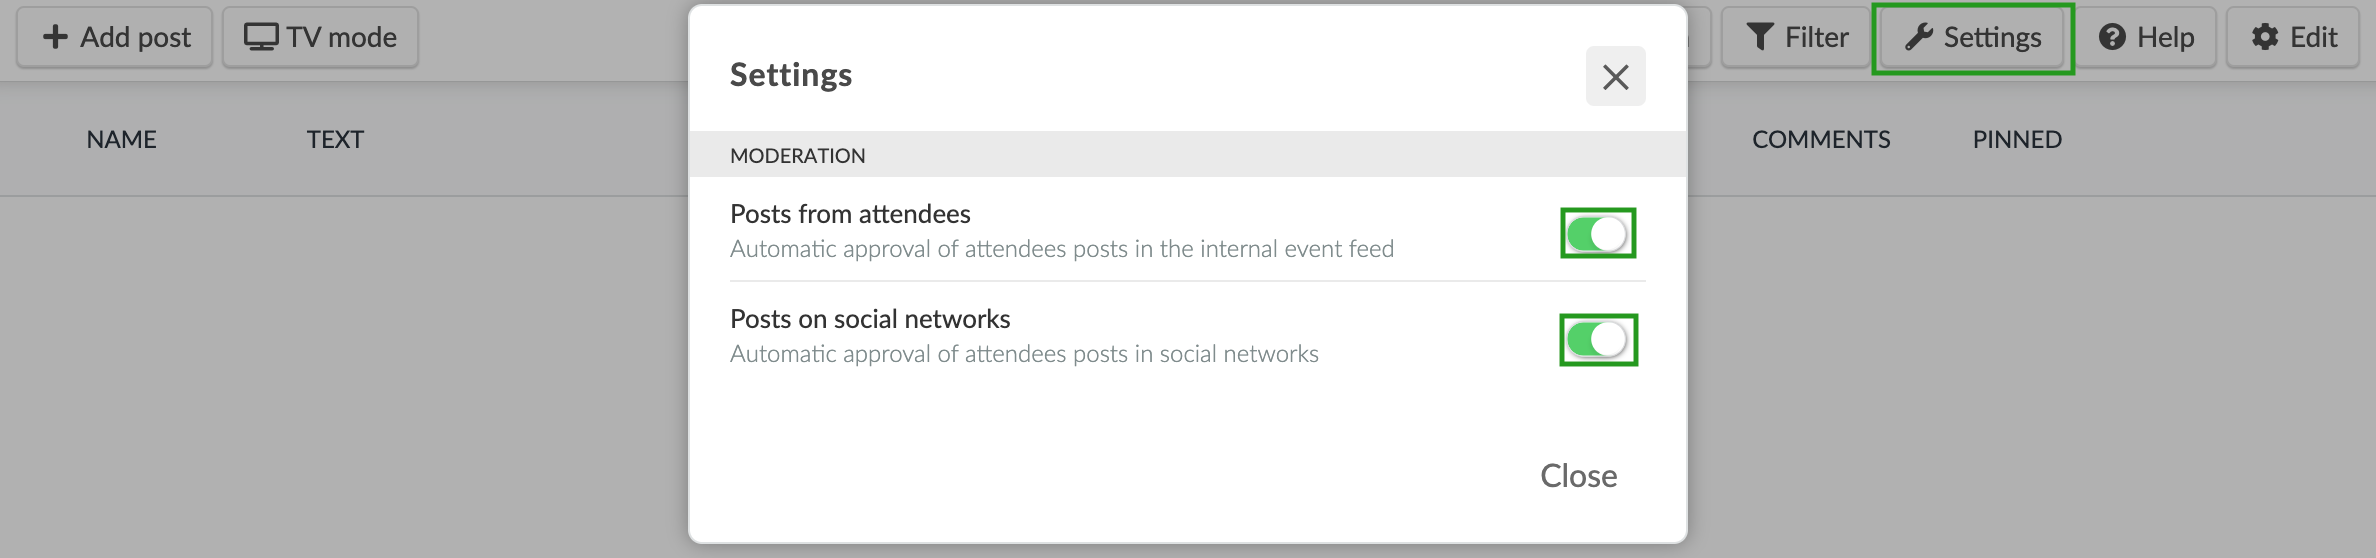 The image displays the settings pop-up that allows you to enable the automatic approval of attendee posts.